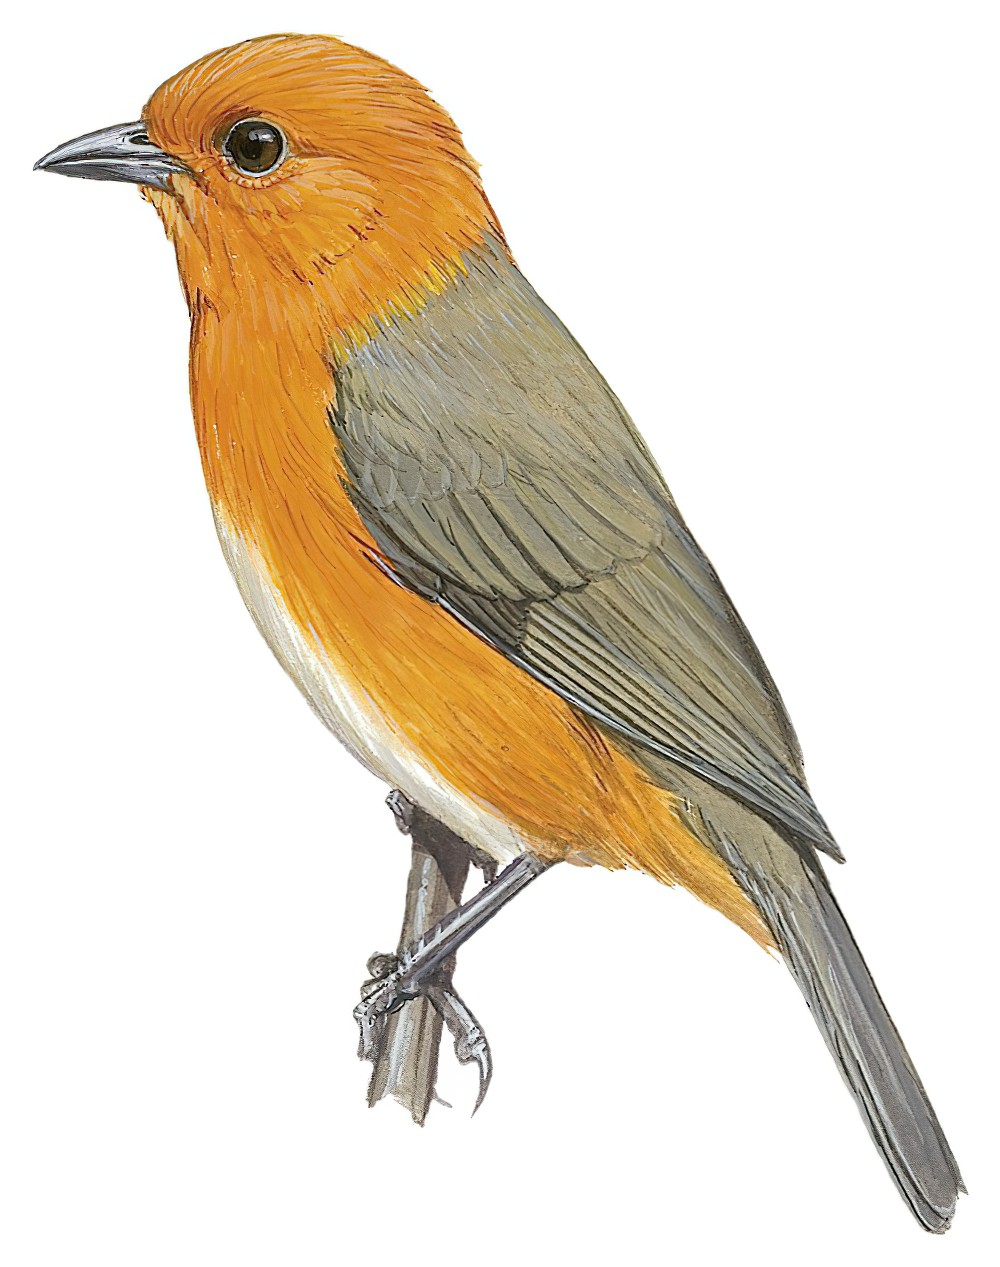 Rufous-chested Tanager / Thlypopsis ornata